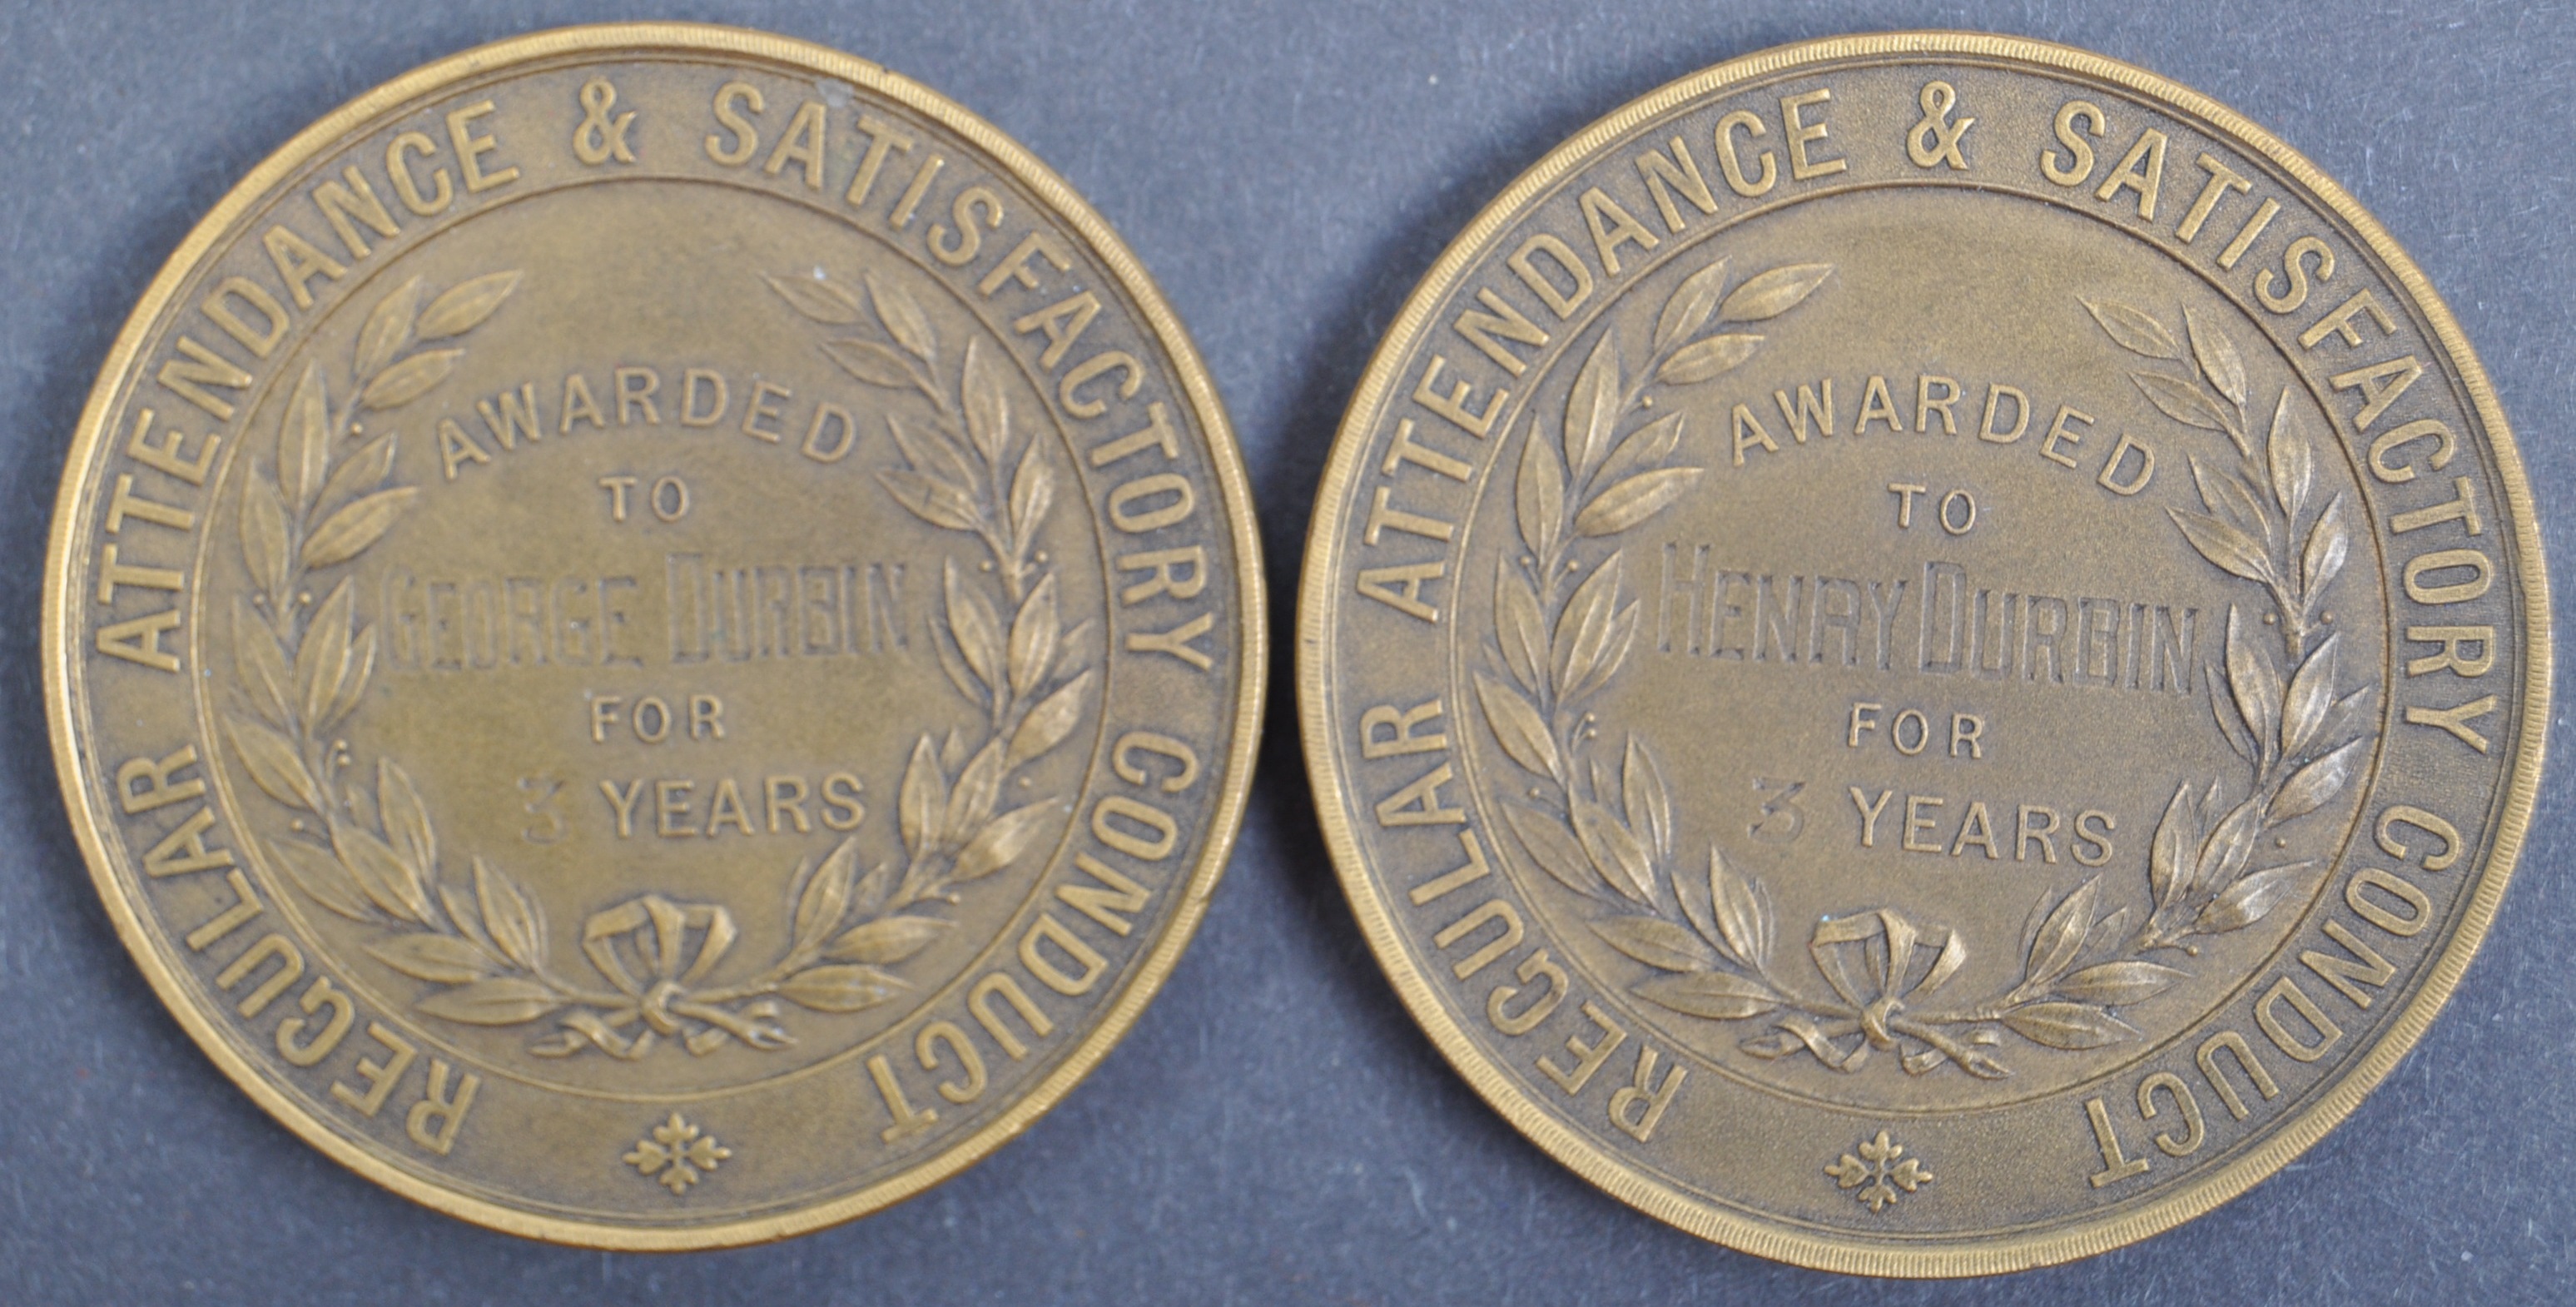 WWI FIRST WORLD WAR MEDAL PAIR & EFFECTS - PRIVATE IN ROYAL SUSSEX RGMT - Image 4 of 8